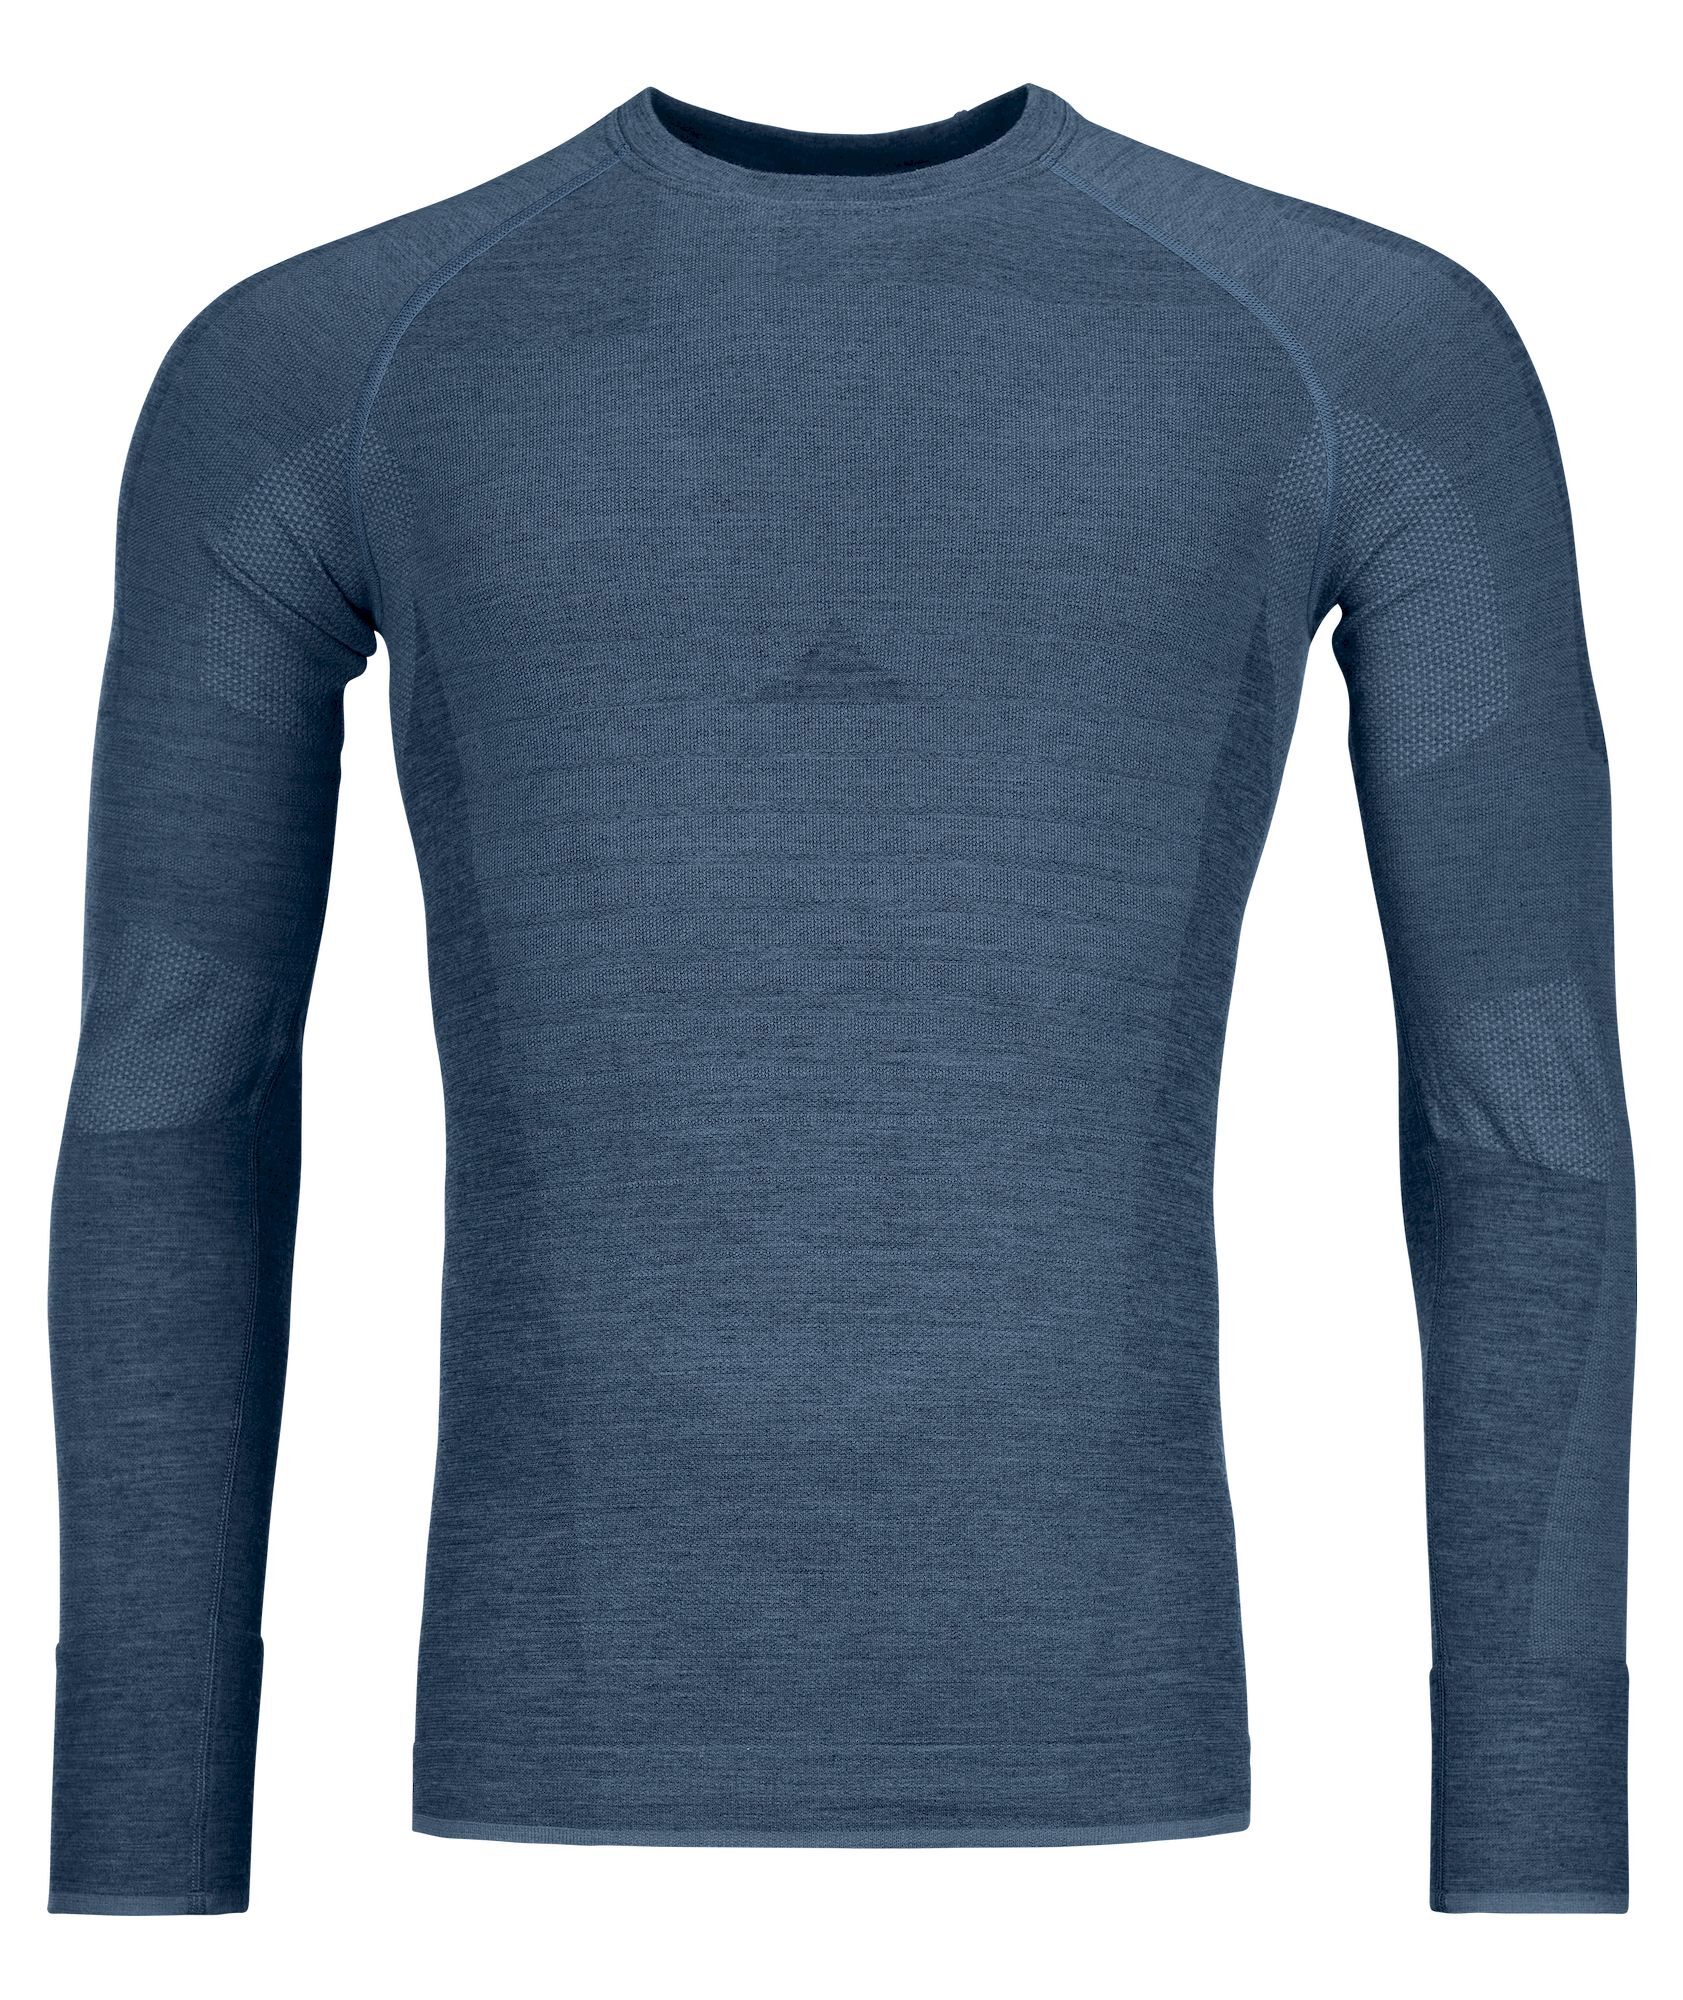 Ortovox 230 Competition Long Sleeve - Ropa interior - Hombre